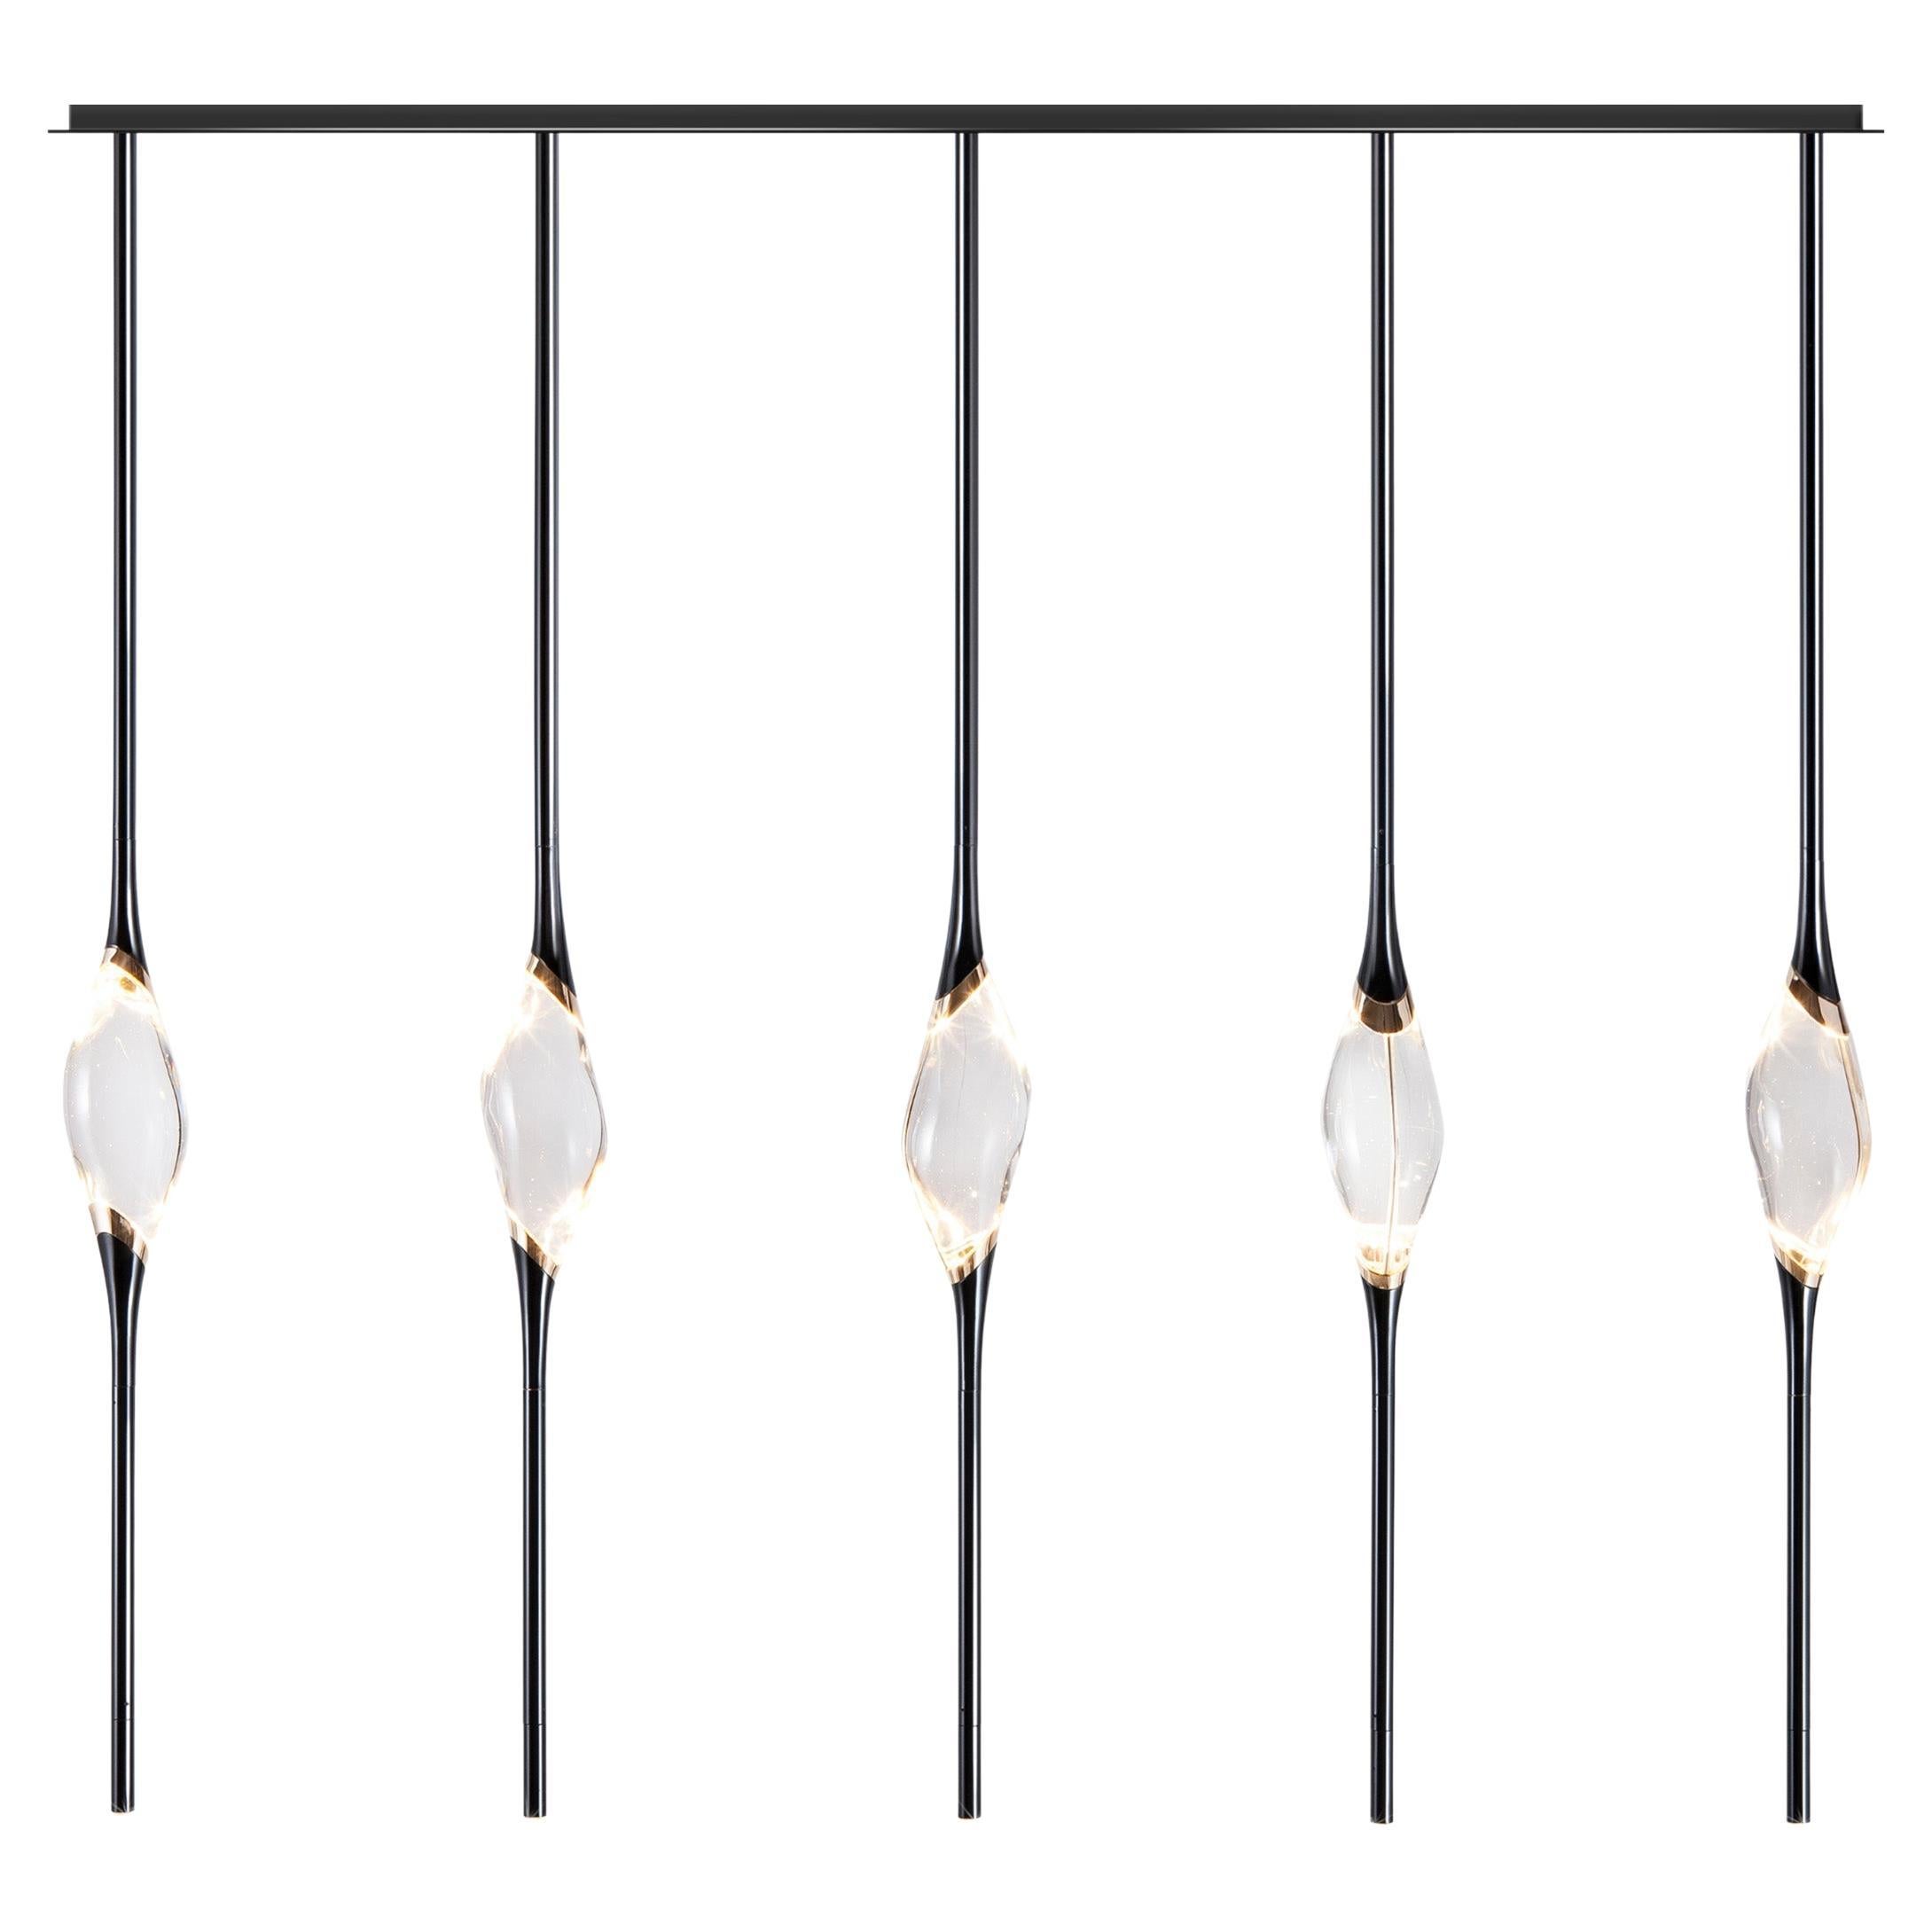 "Il Pezzo 12 Long Chandelier" - length 130cm/51.2” - black and polished brass For Sale